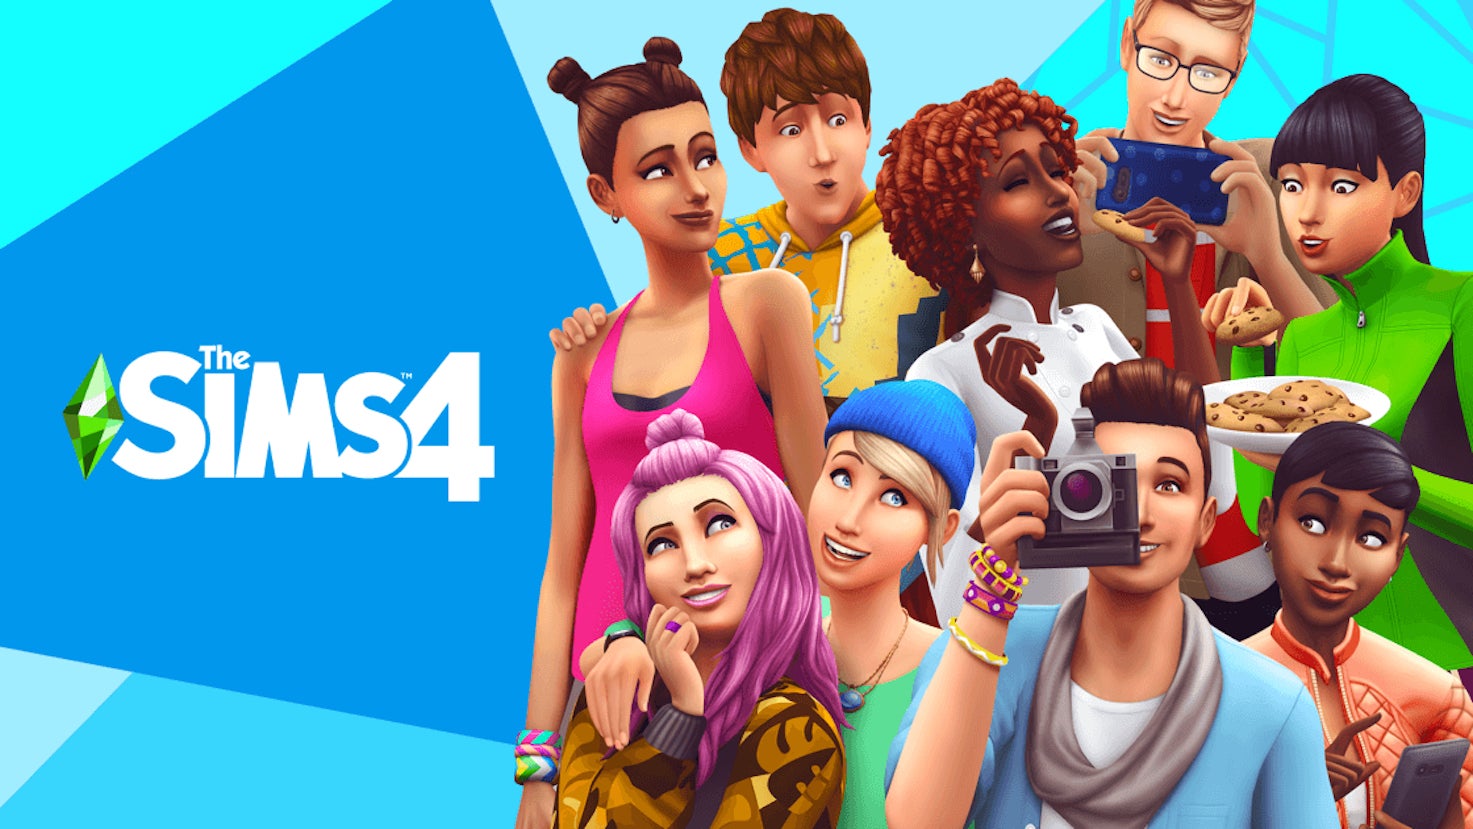 Sims 4 key art - a group of sims pulling faces with the sims 4 logo